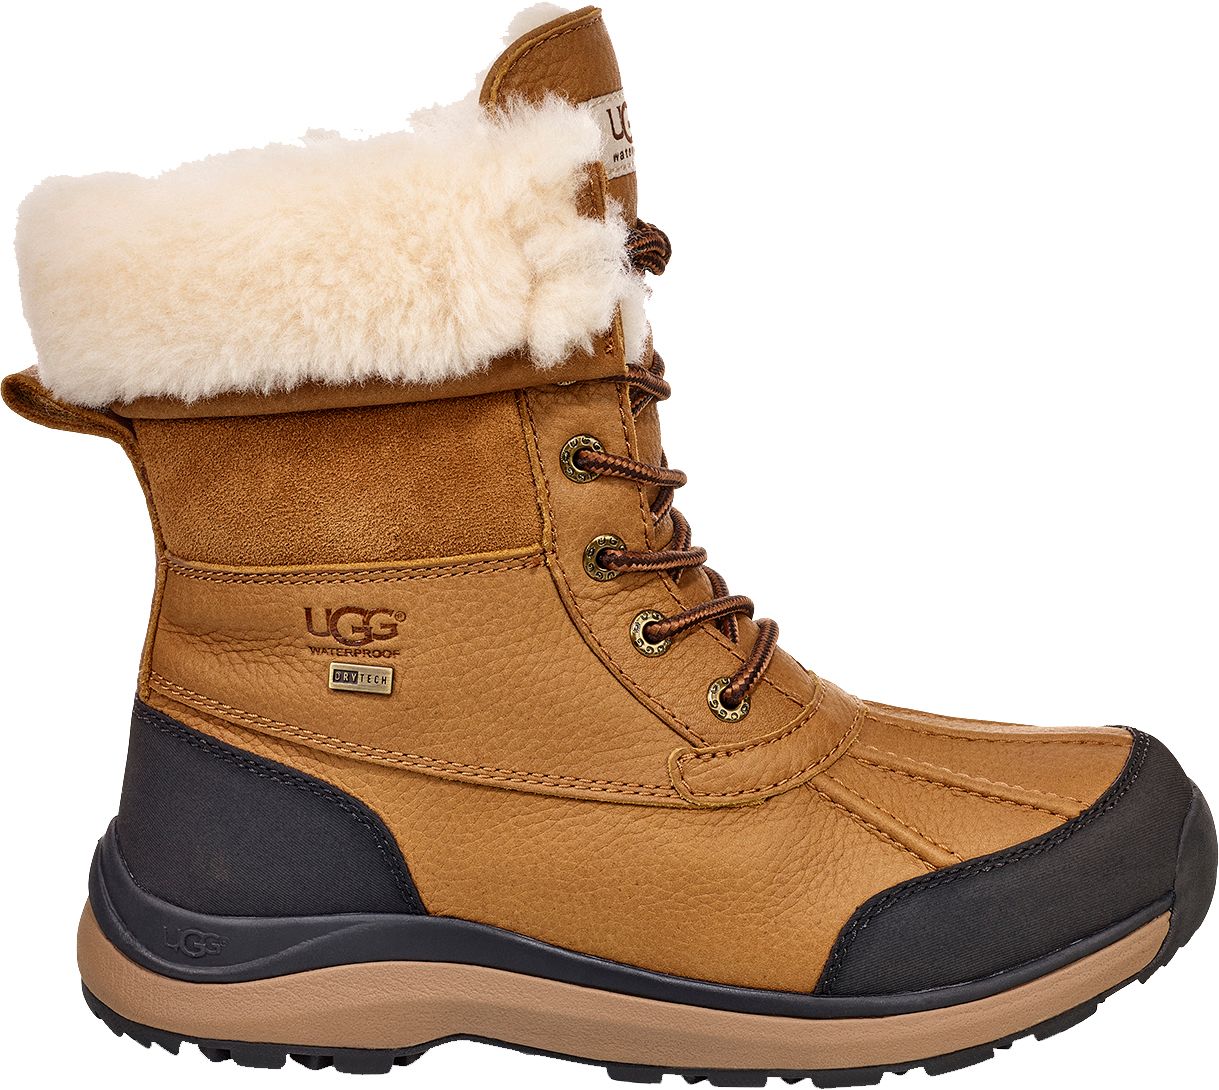 where can i buy uggs boots near me